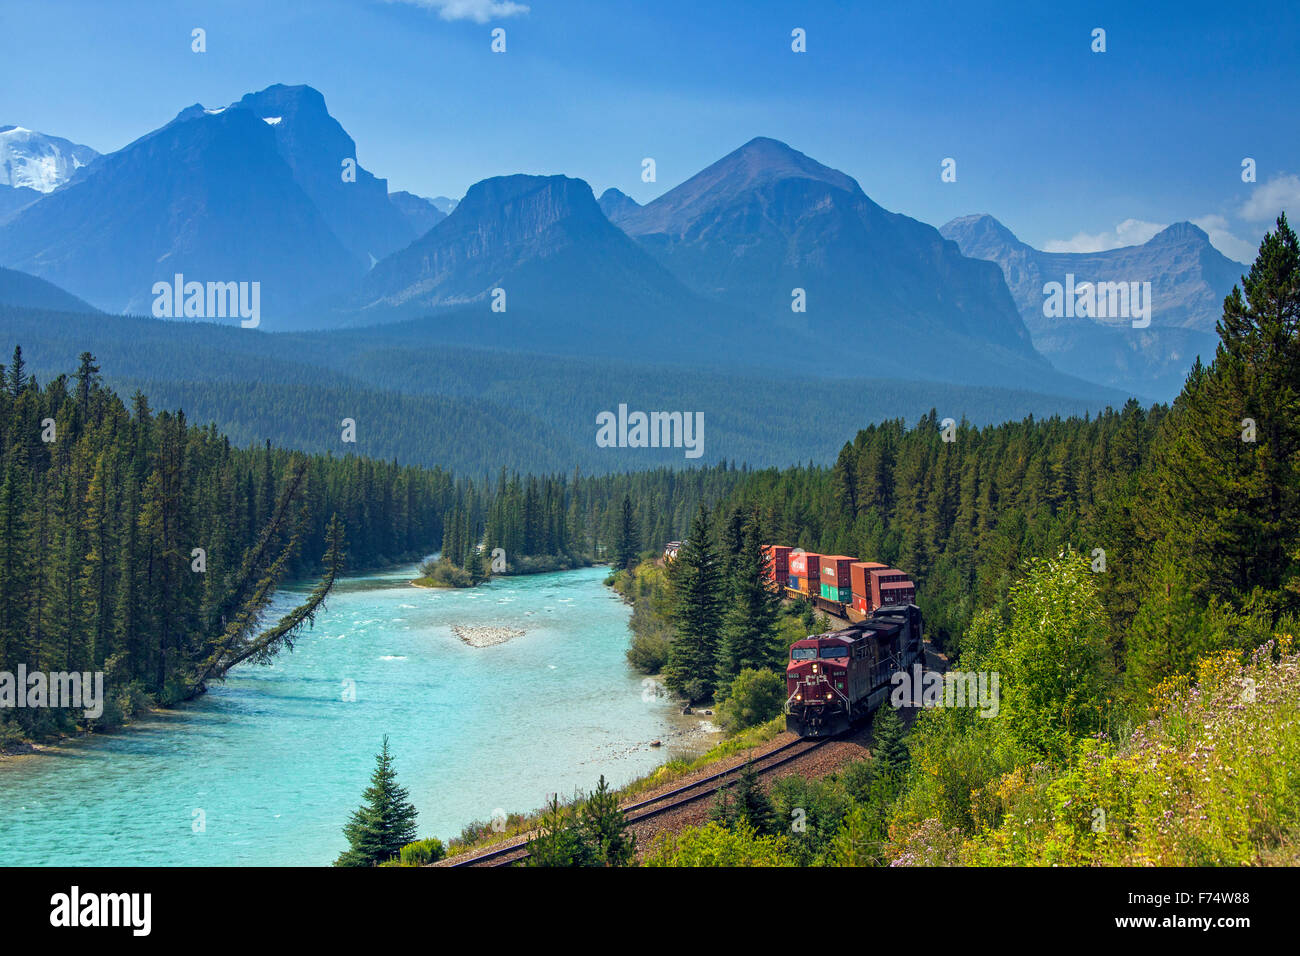 Freight train of Canadian Pacific Railway along the Bow River at Morant's Curve, Banff National Park, Alberta, Canadian Rockies Stock Photo